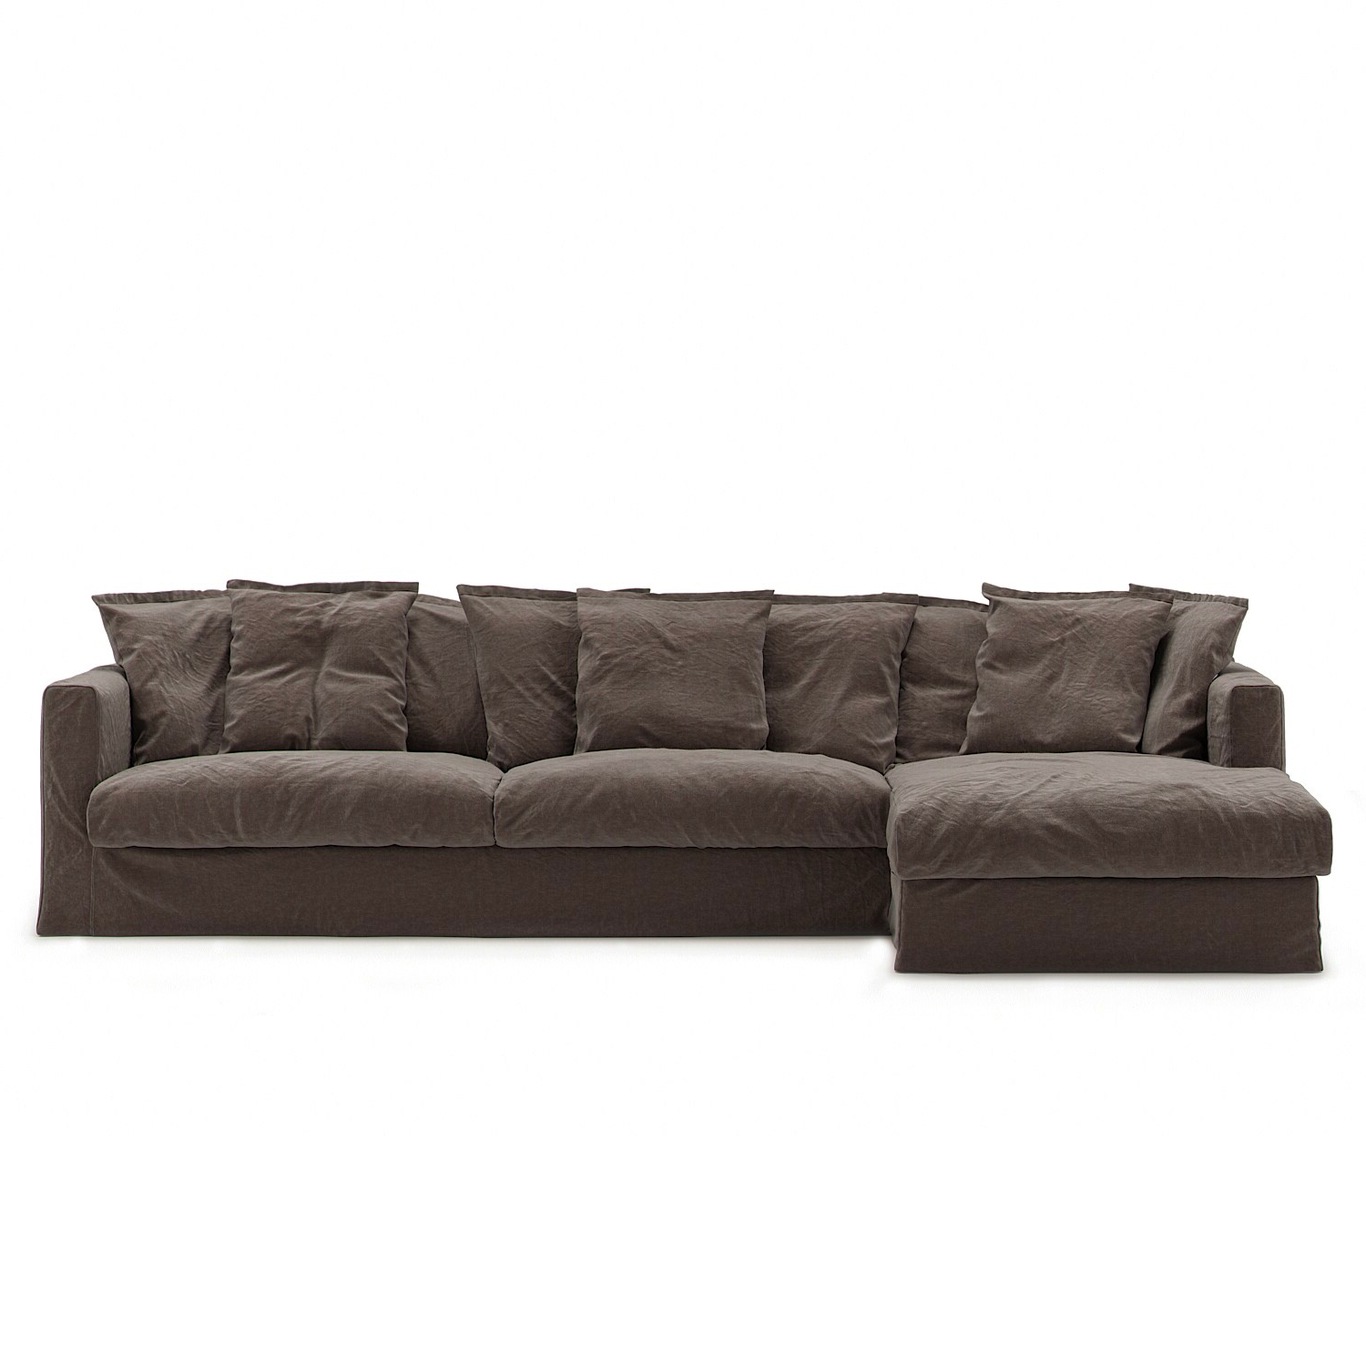 Le Grand Air Upholstery 3-Seater Divan Right Linen, Truffle Brown